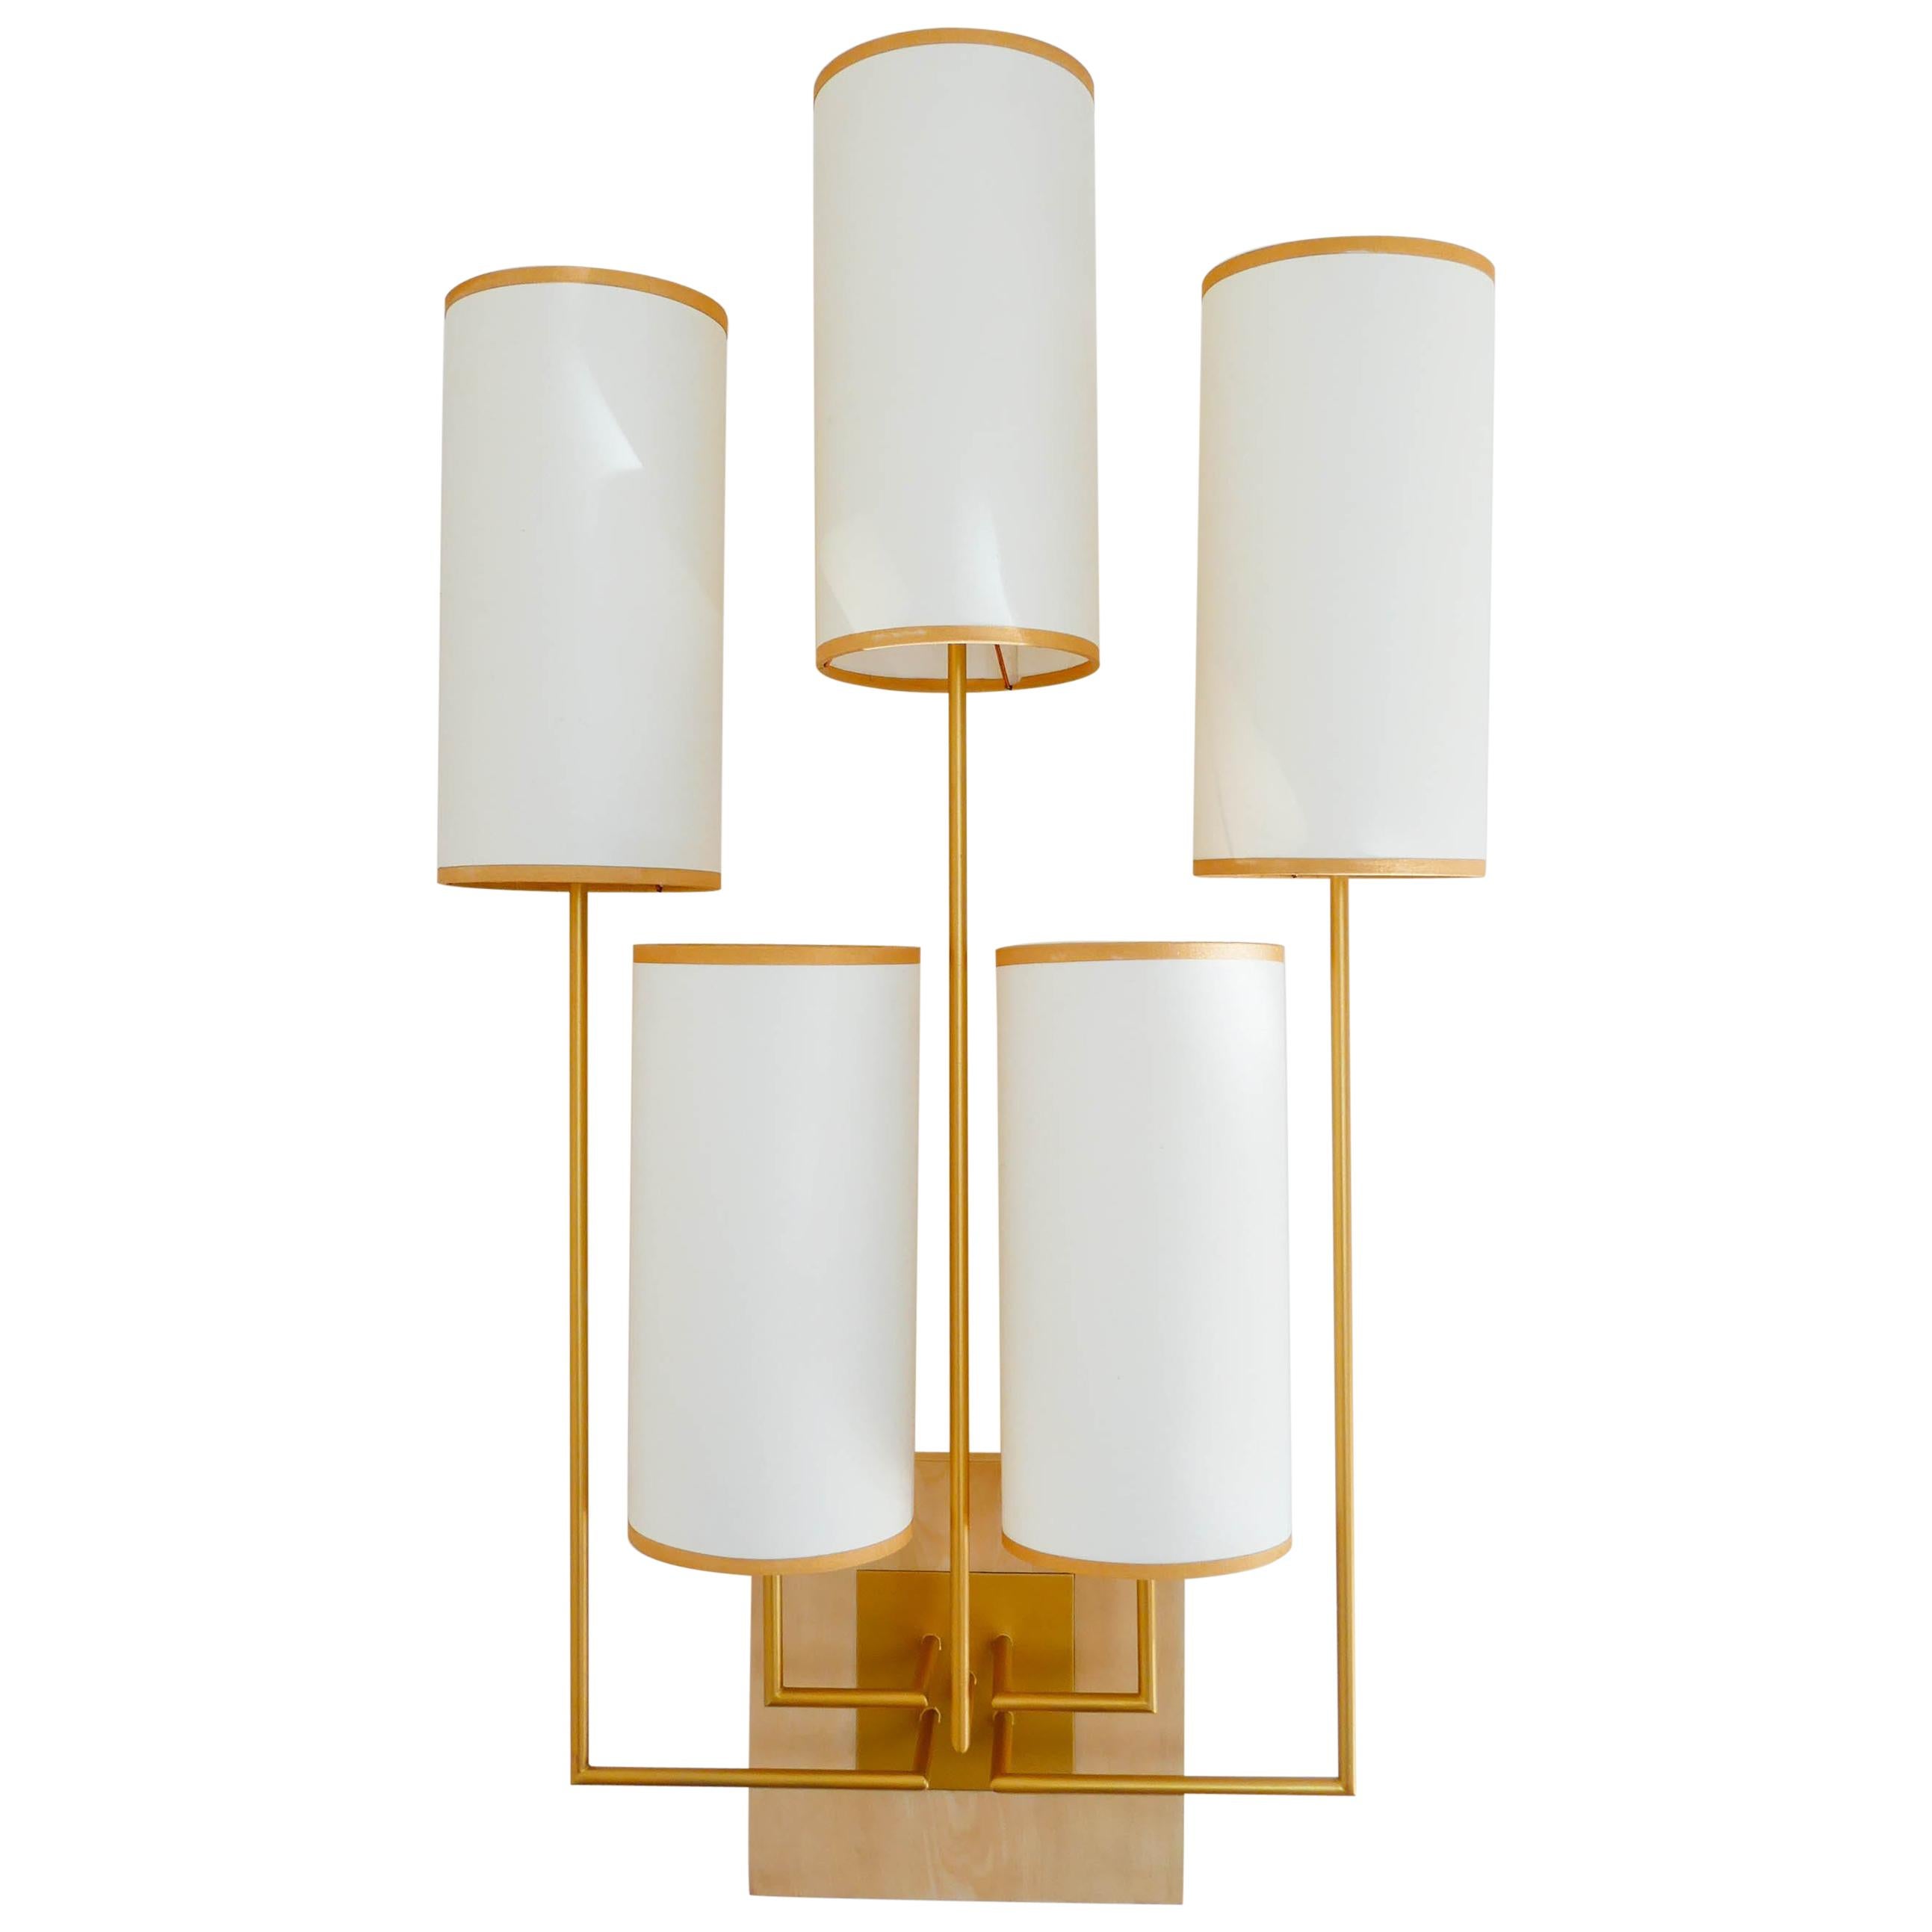 Wall Light, Sconce in Gold Patina And Chestnut Wood